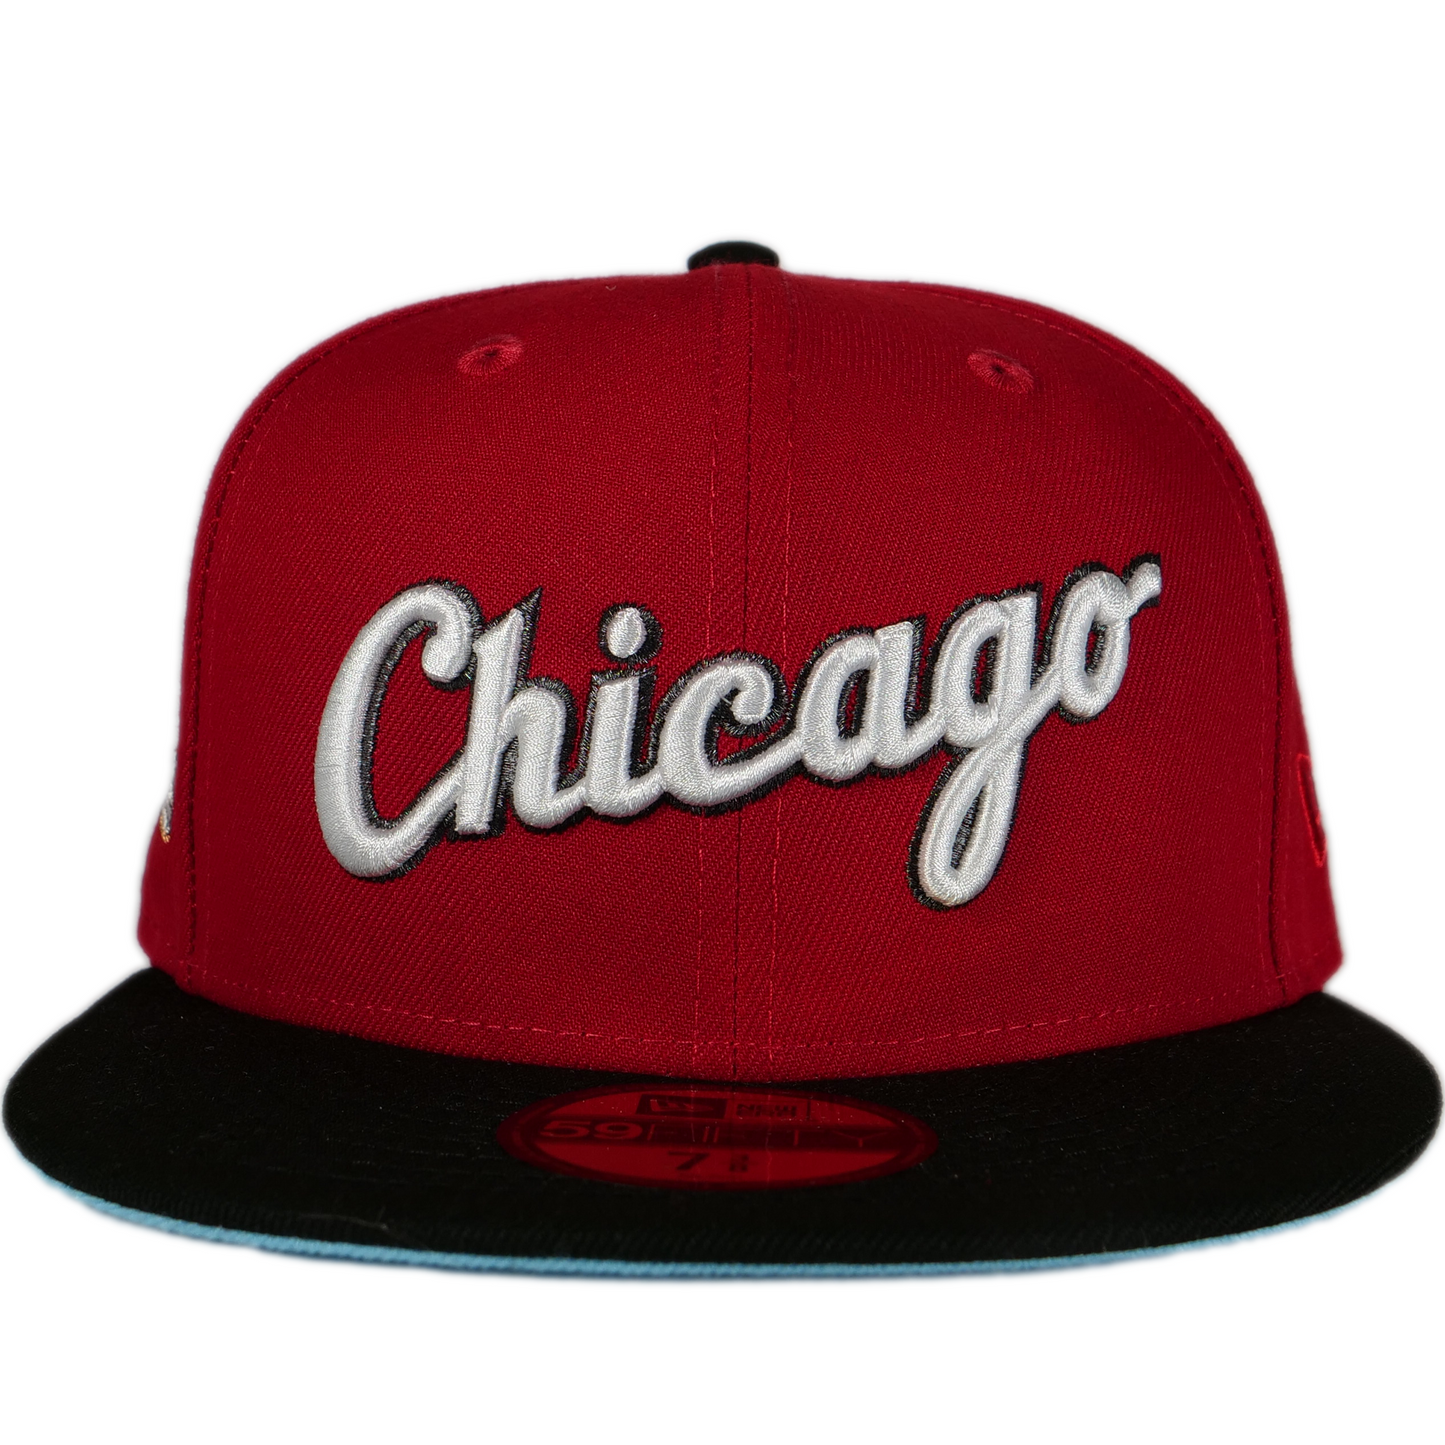 New Era Chicago White Sox 59FIFTY Fitted Hat - Scarlet/ Black